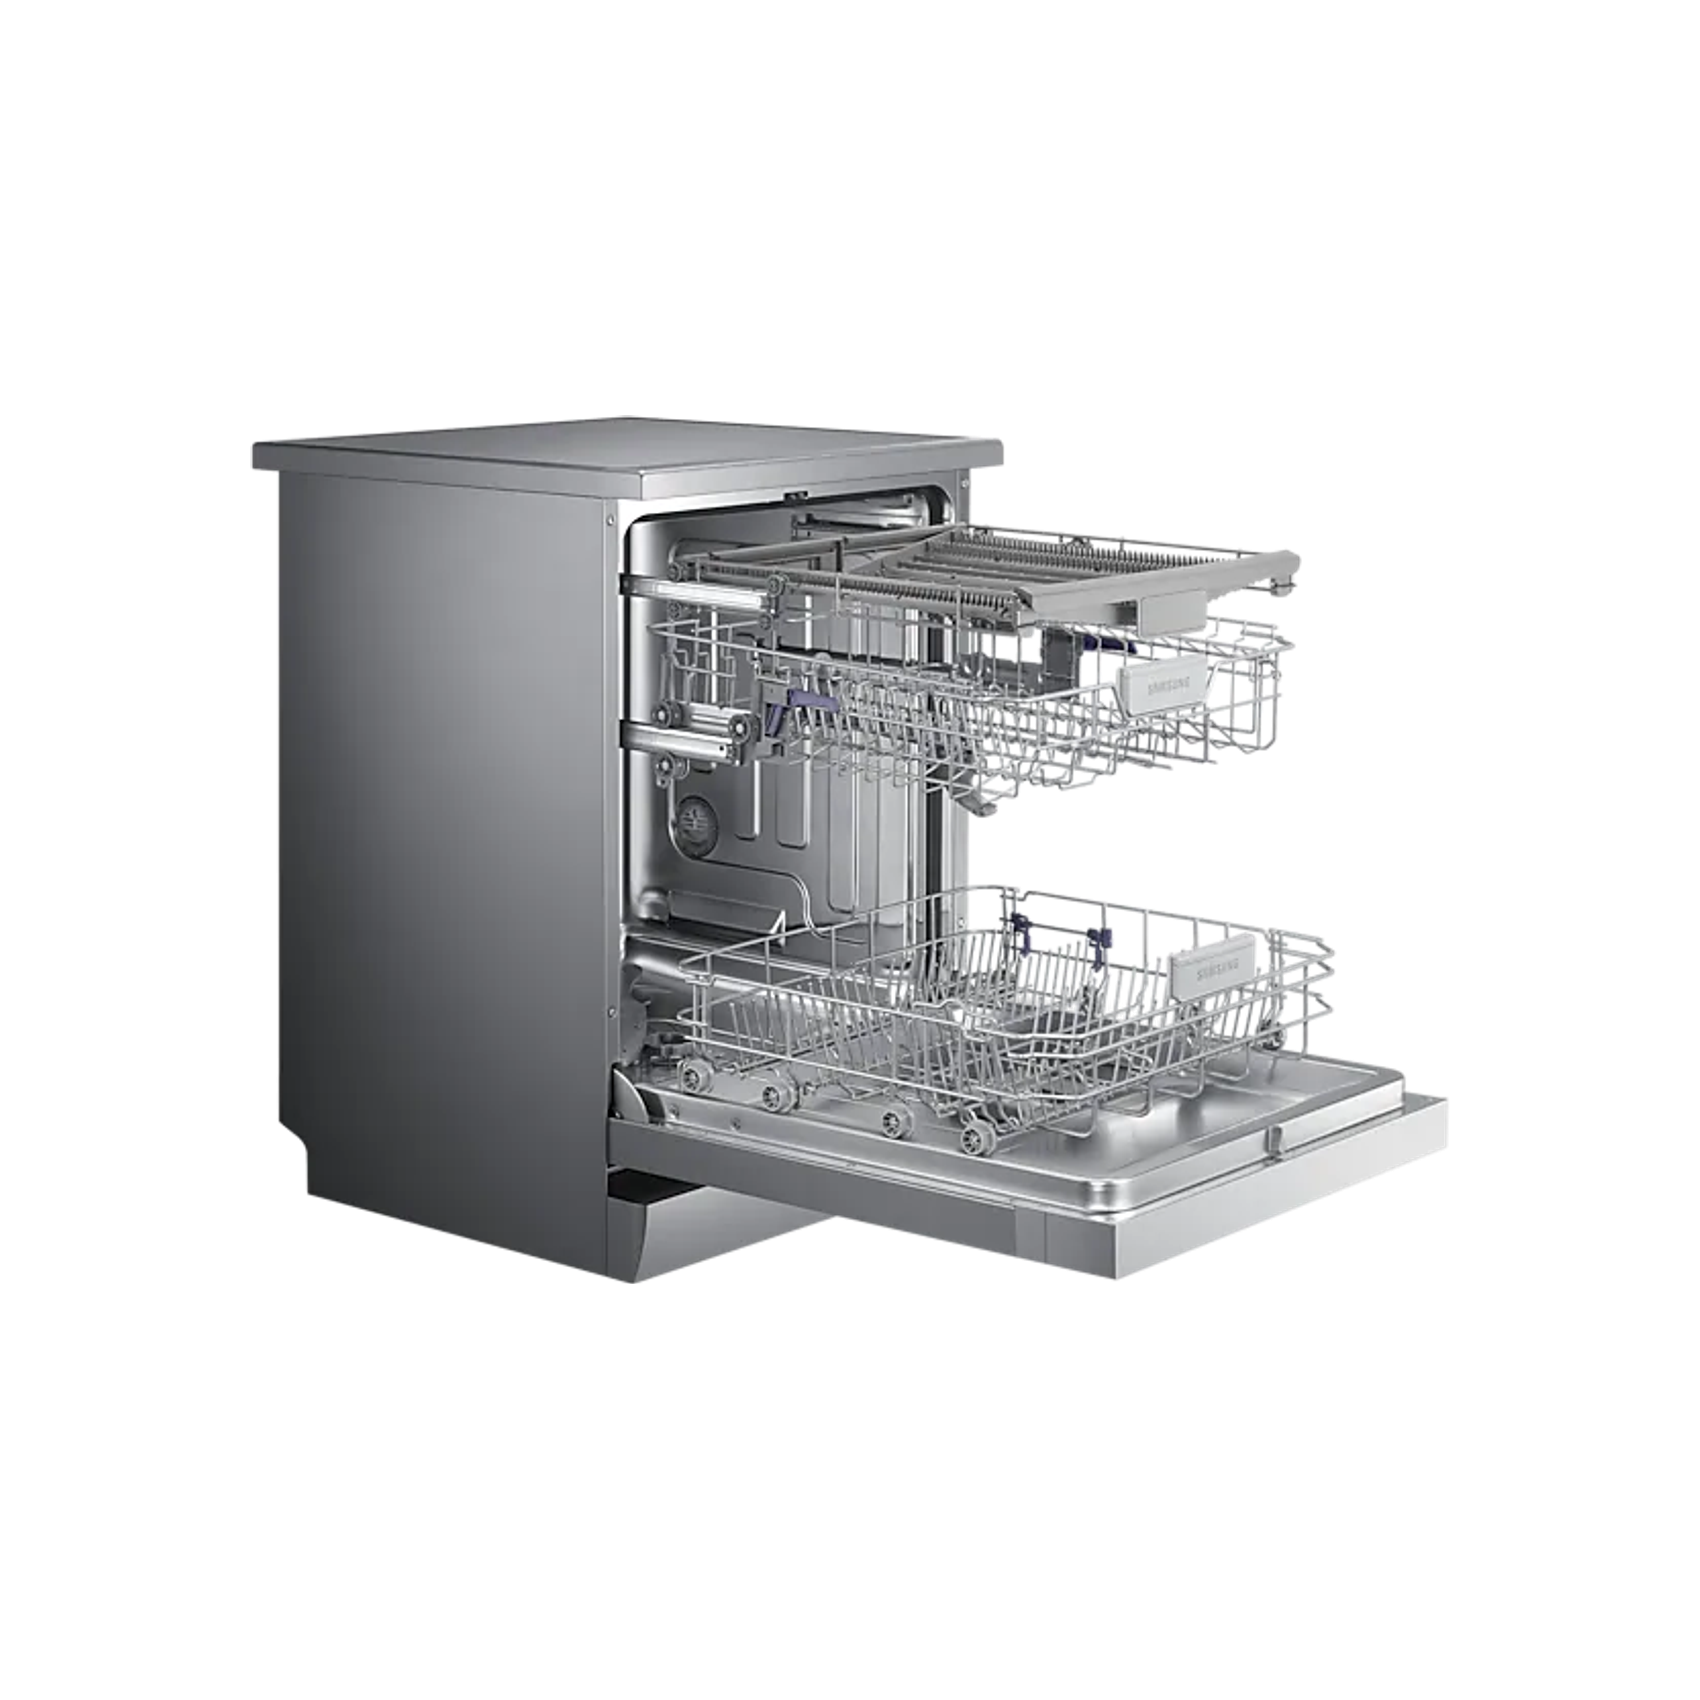 Samsung 14 Place Dishwasher with Wide Led Display - Silver (Photo: 3)